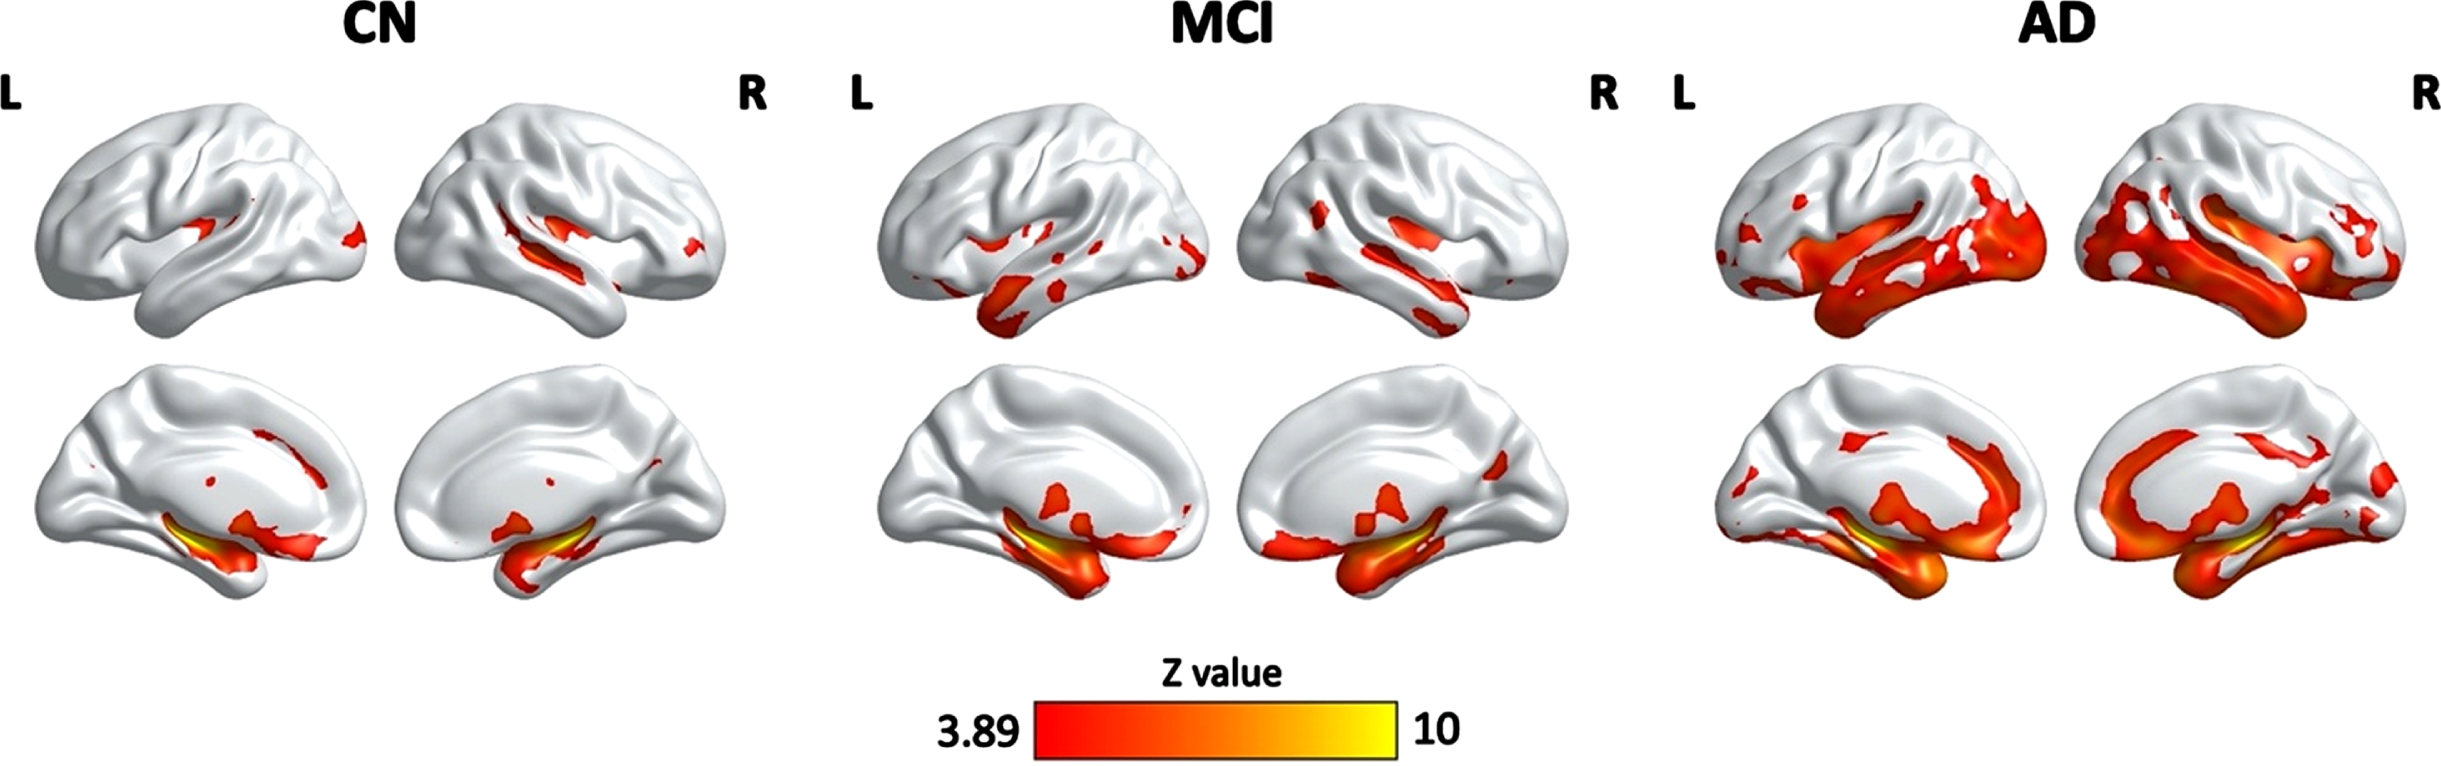 Clusters showing significant associations between the HPF and cortical grey matter volume, controlling for age, quadratic age, gender, scanning protocol, and TIV. The resulting clusters were corrected for multiple comparisons (Z > 3.89, GRF corrected). L, left; R, right; CN, cognitively normal; MCI, mild cognitive impairment; AD, Alzheimer’s disease.